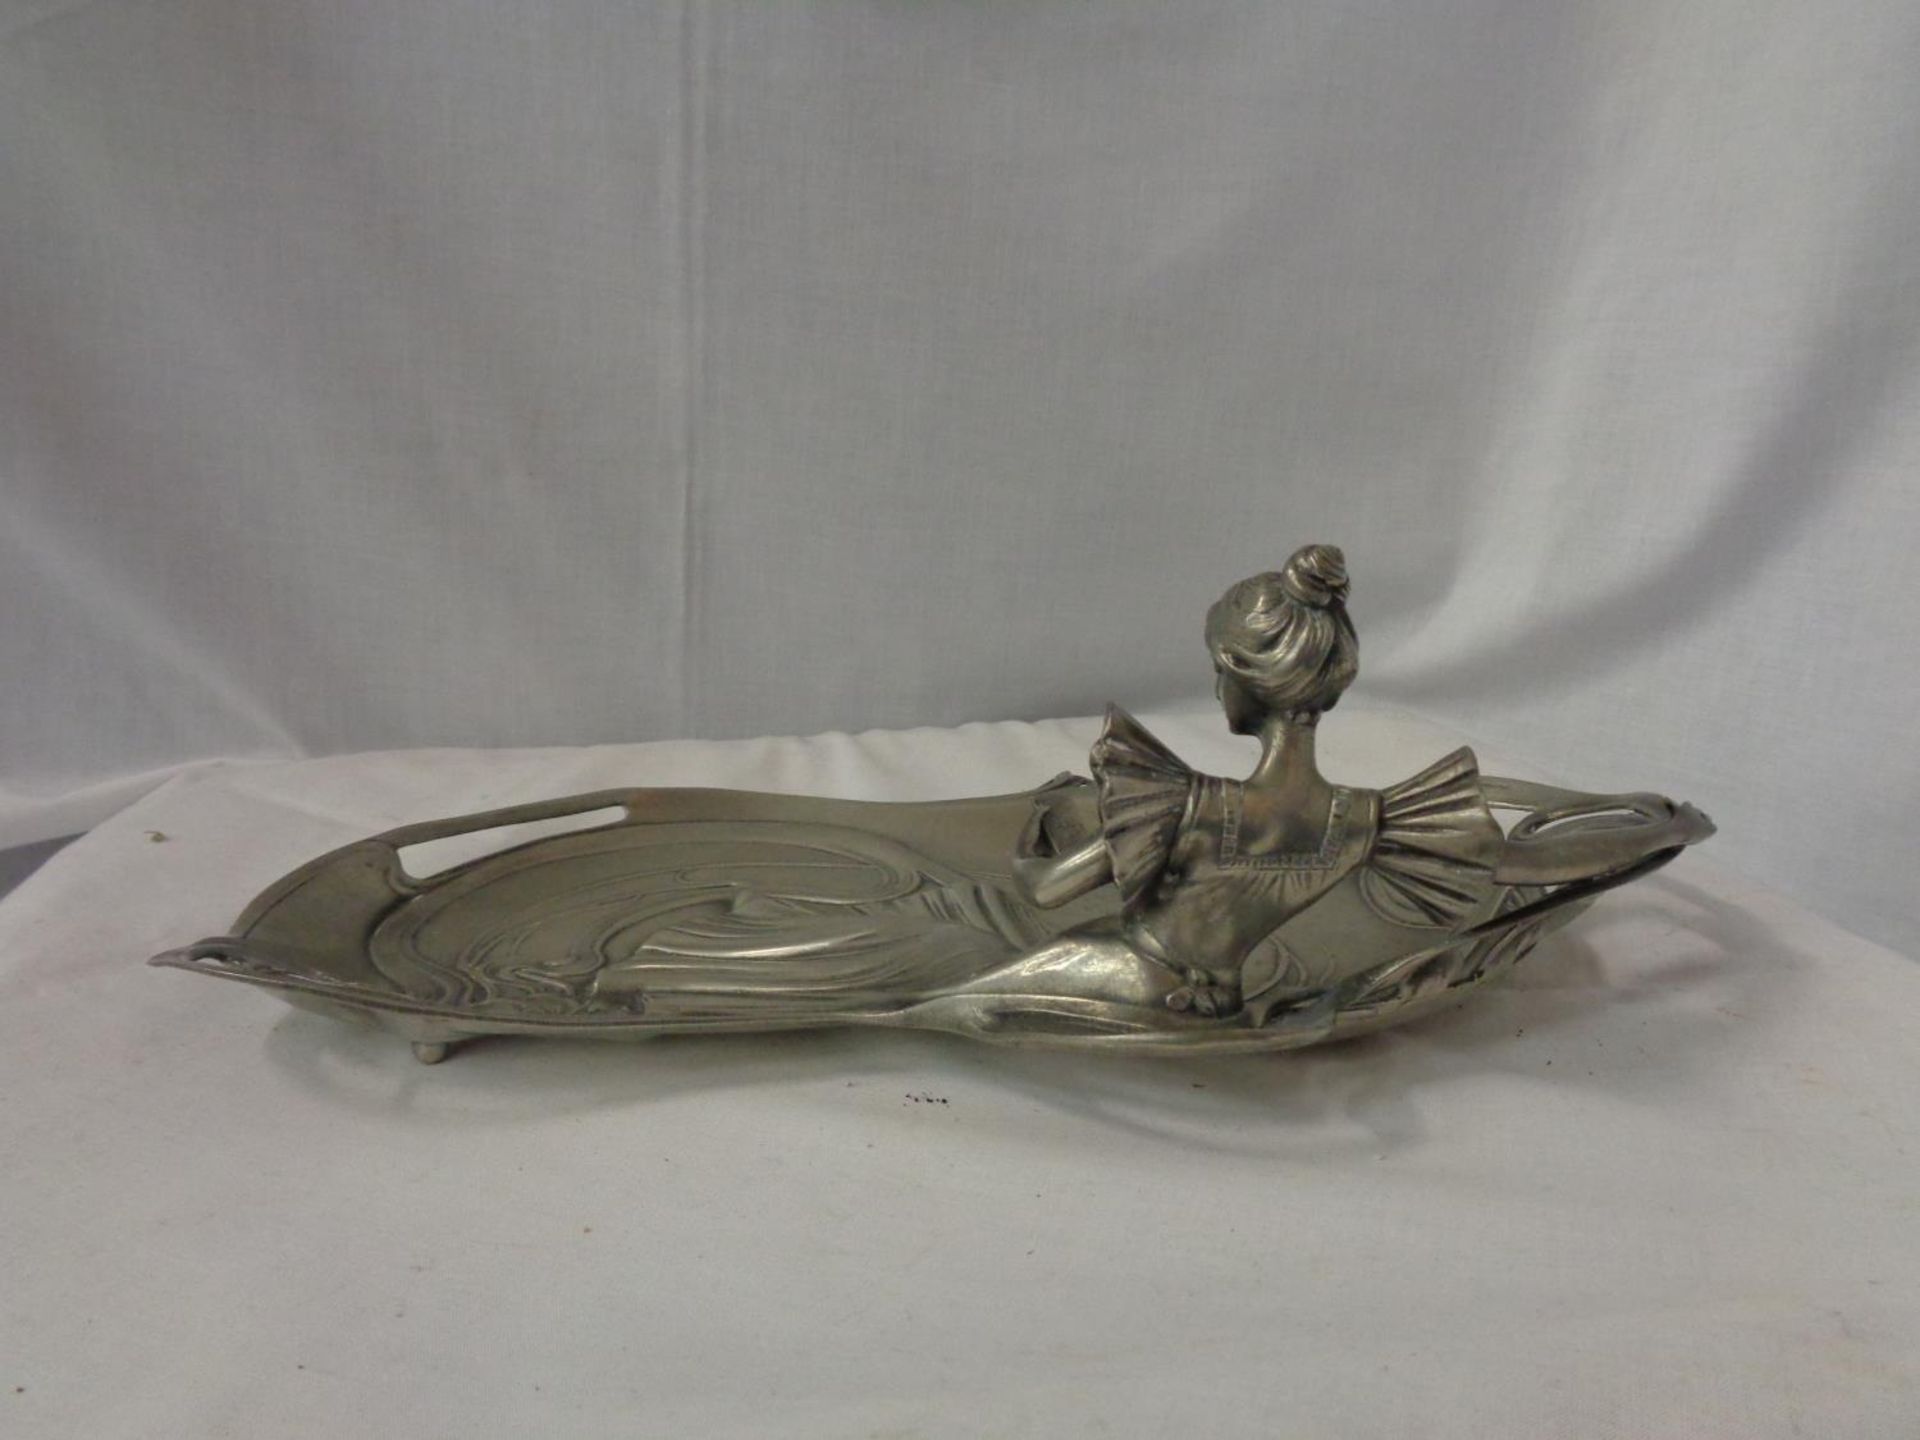 A PEWTER ART DECO STYLE DISH WITH THE FIGURE OF A LADY - Image 3 of 4